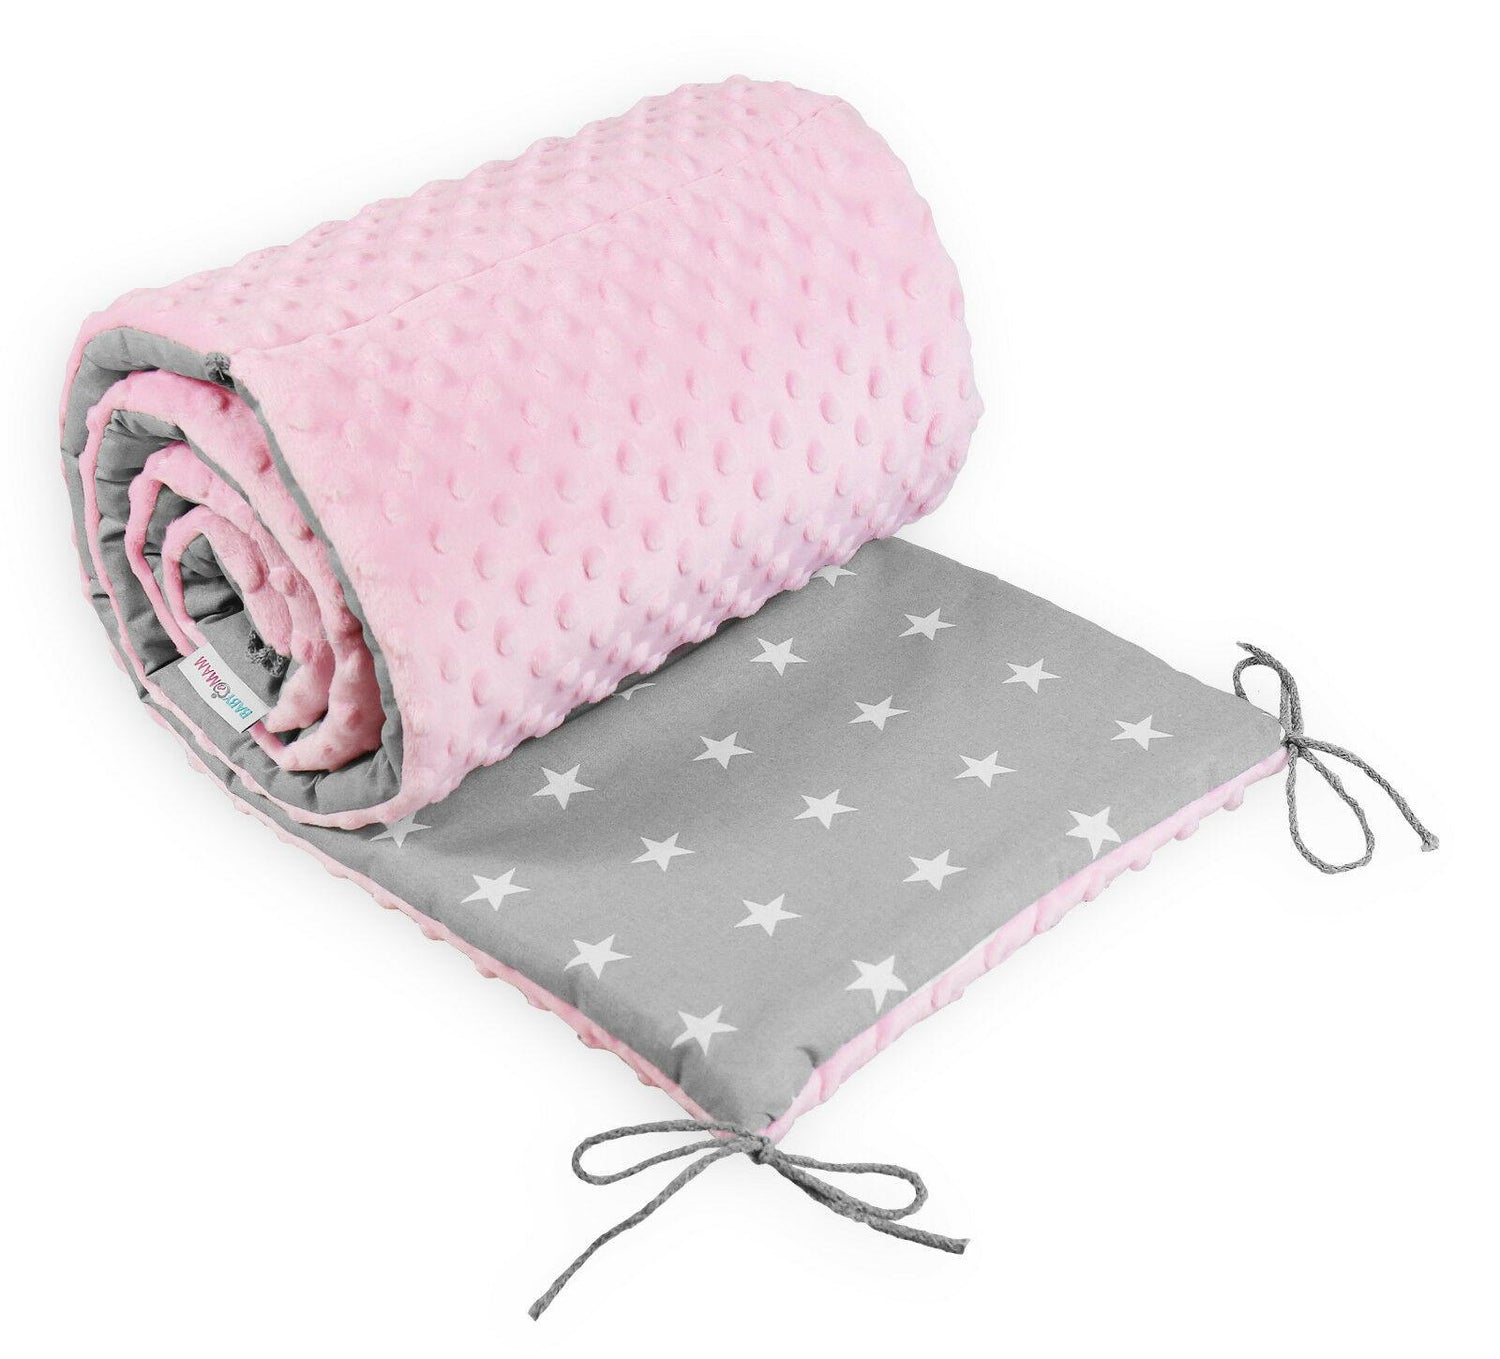 Baby Dimple Padded Bumper Nursery Protection Fit Cot Bed 140X70 190cm Pink / Small White Stars On Grey